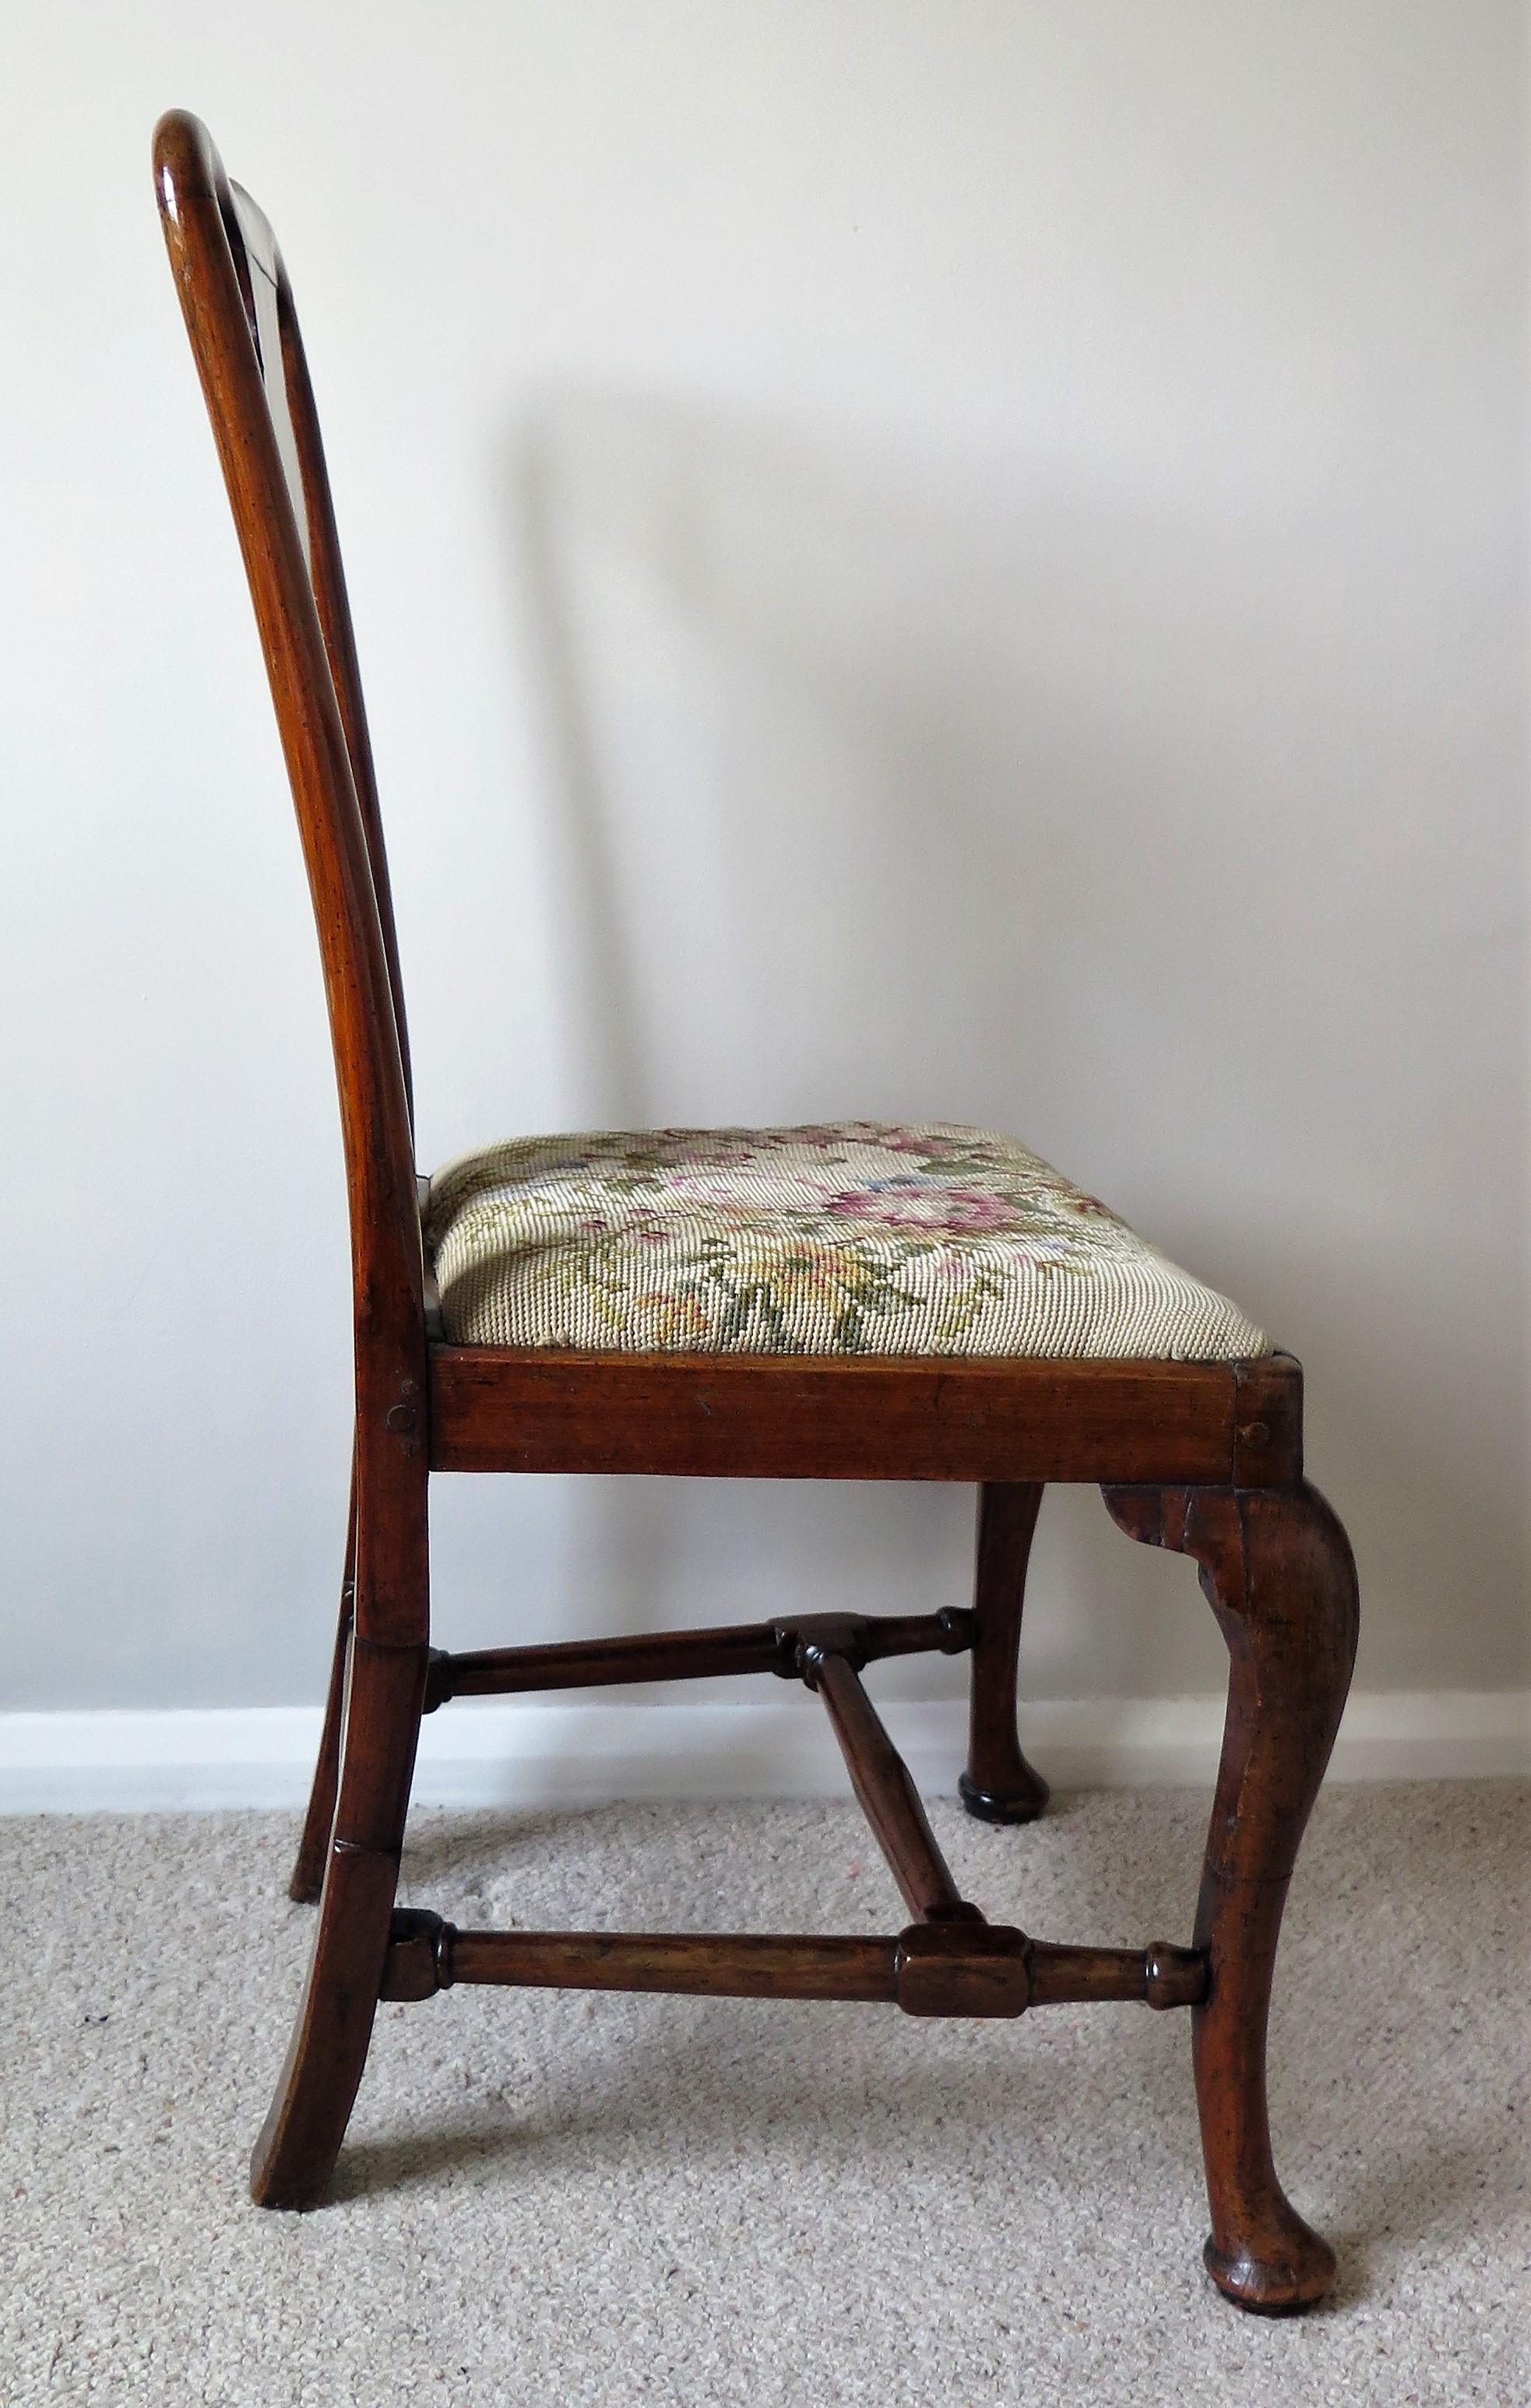 Queen Anne Period Walnut Chair Cabriole Legs and Stretchers, English circa 1700 For Sale 1